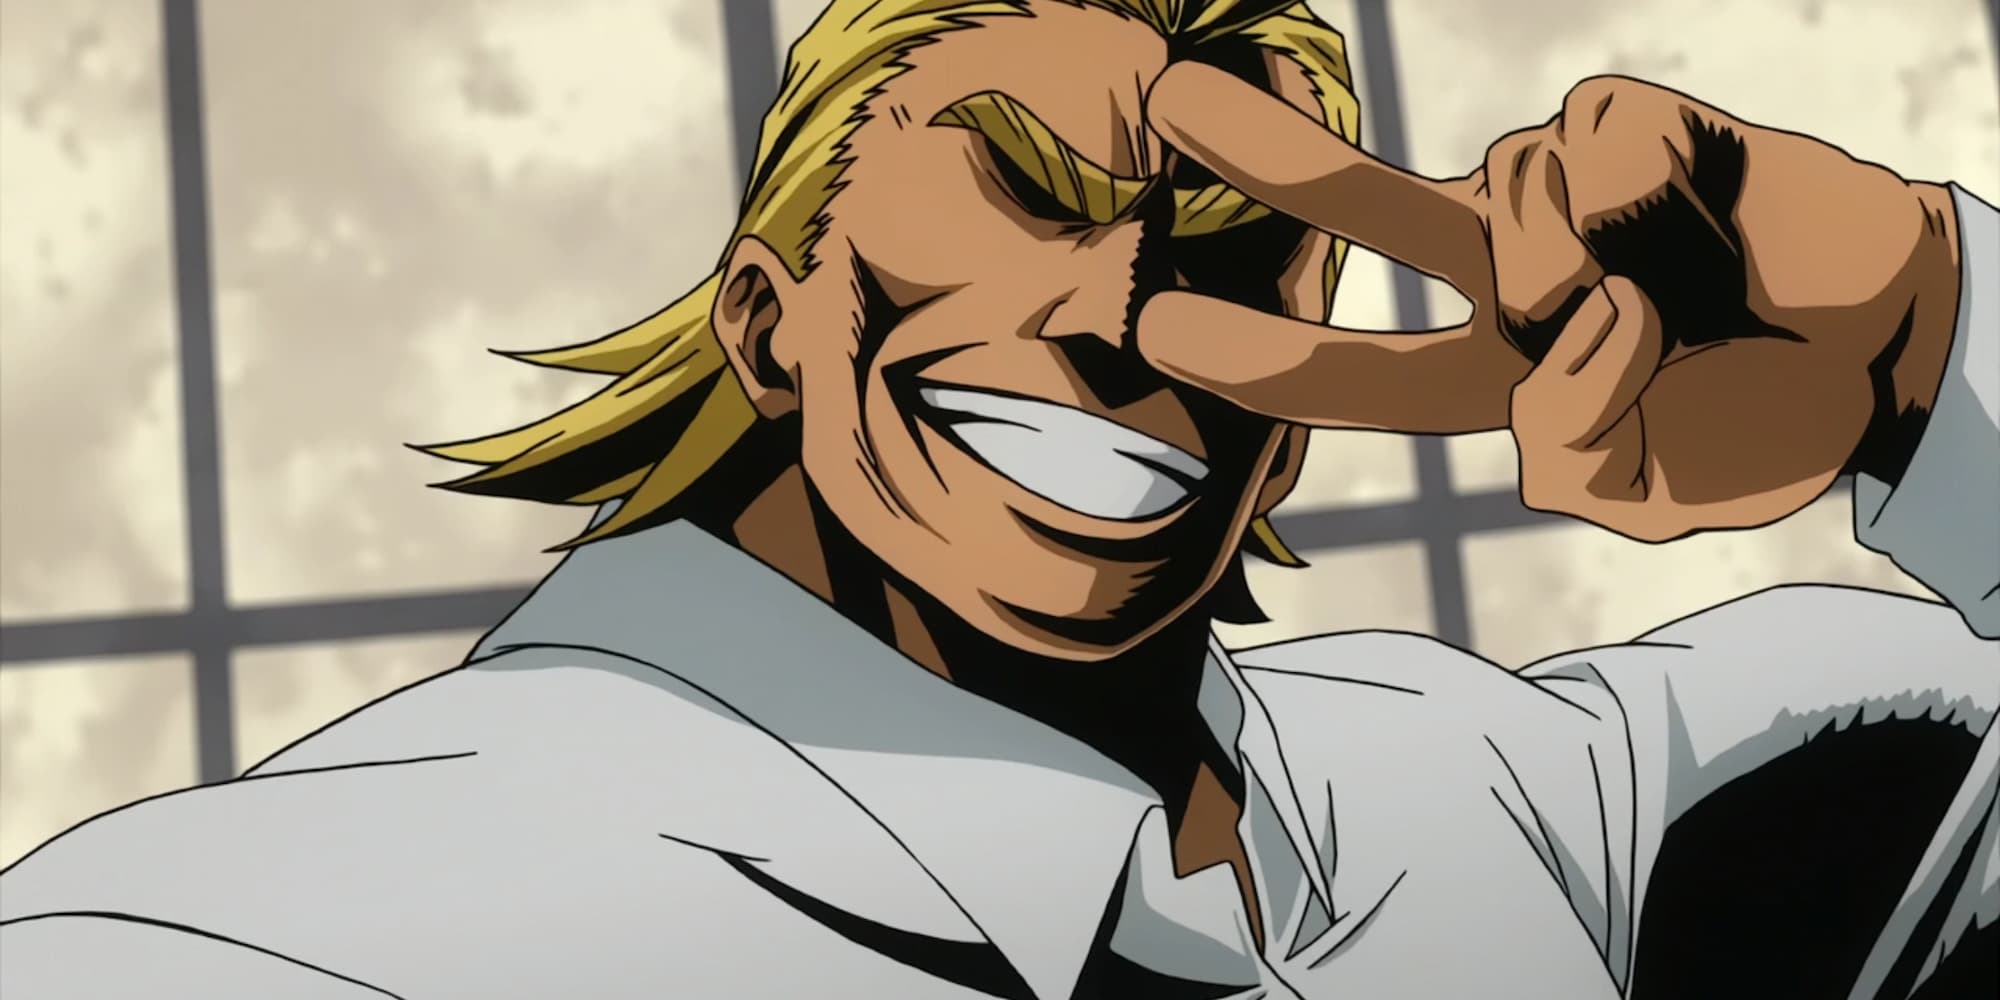 All Might smiling